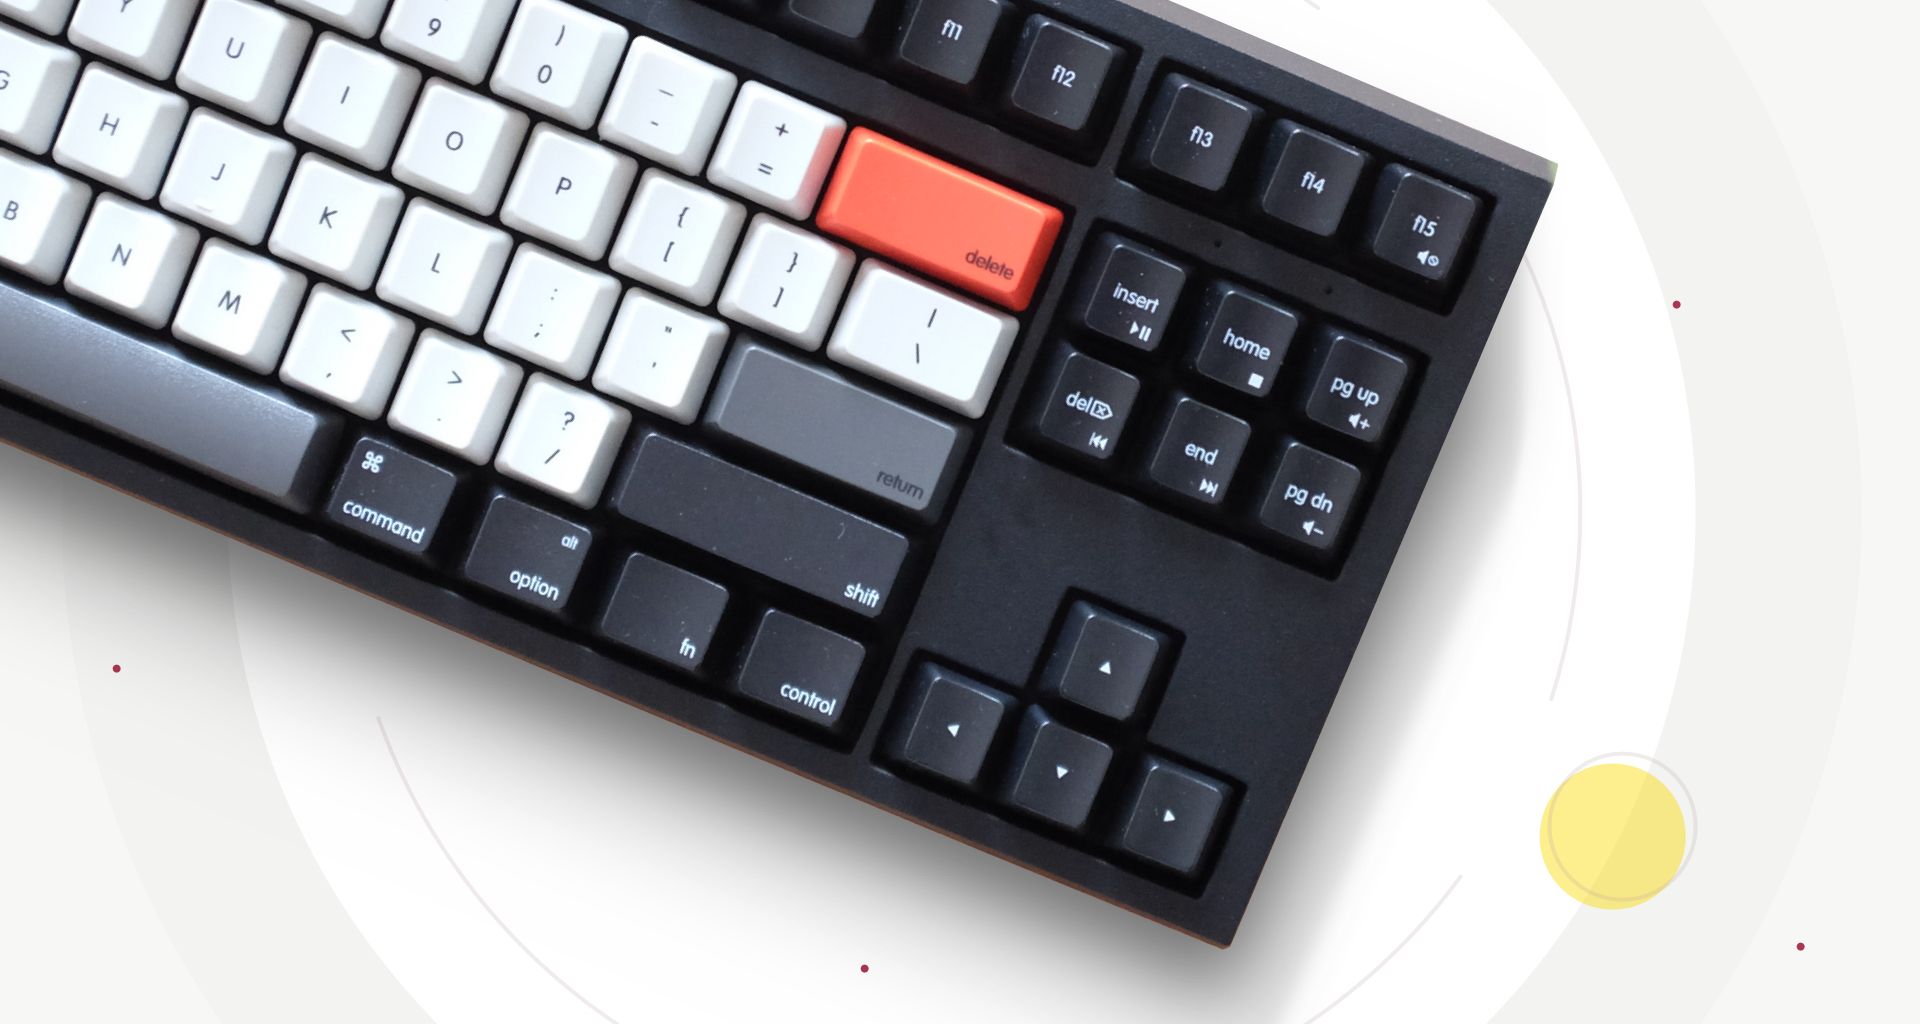 Course and Major Computer Science Black Keycap Mechanical Keyboard PBT Gaming Upgrade Kit 